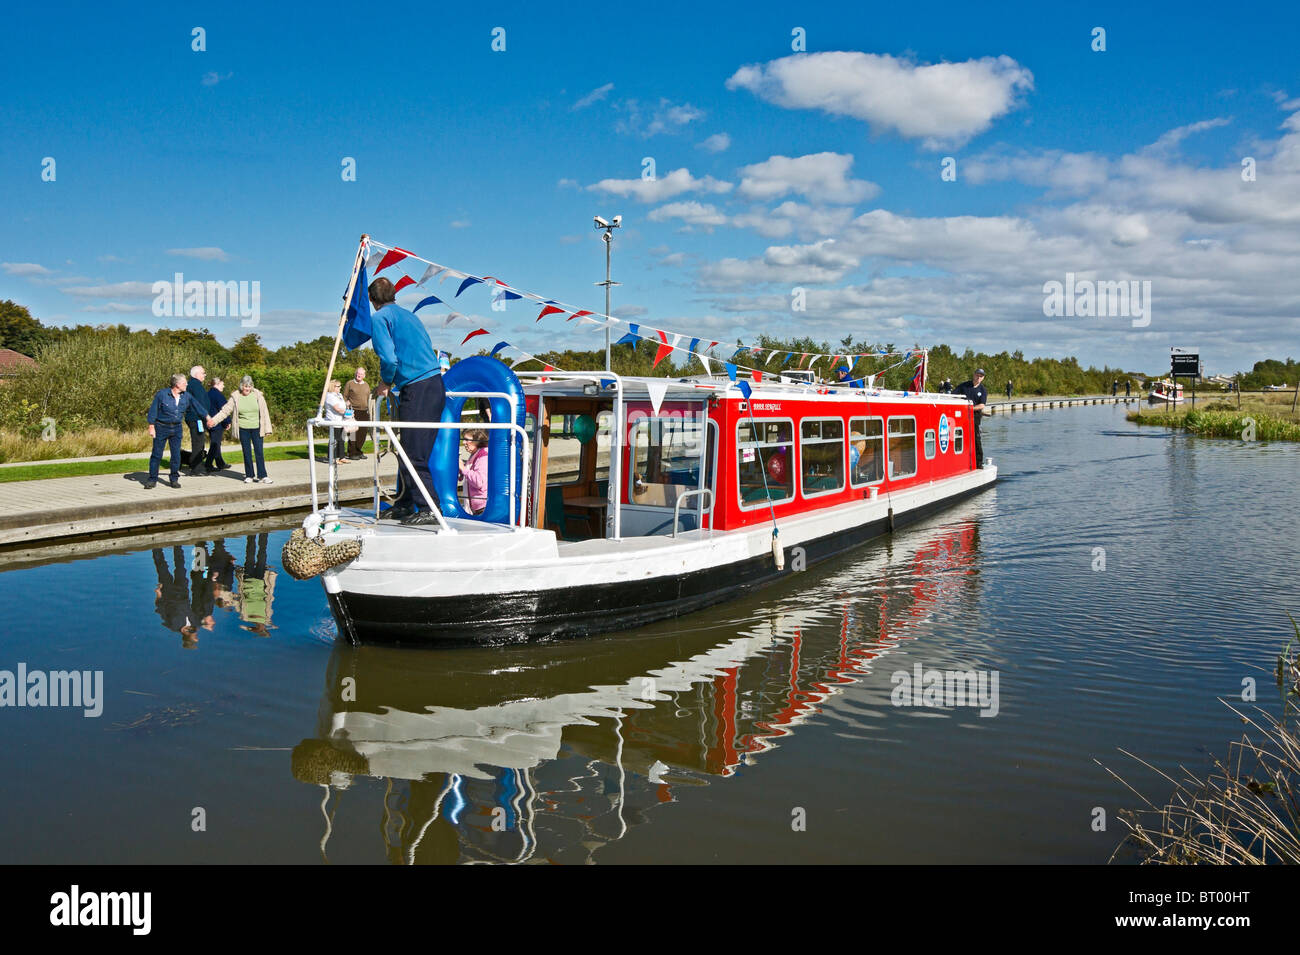 Canal boats arriving at the locks at the Union Canal near the junction with the Forth & Clyde Canal at Falkirk Wheel Stock Photo